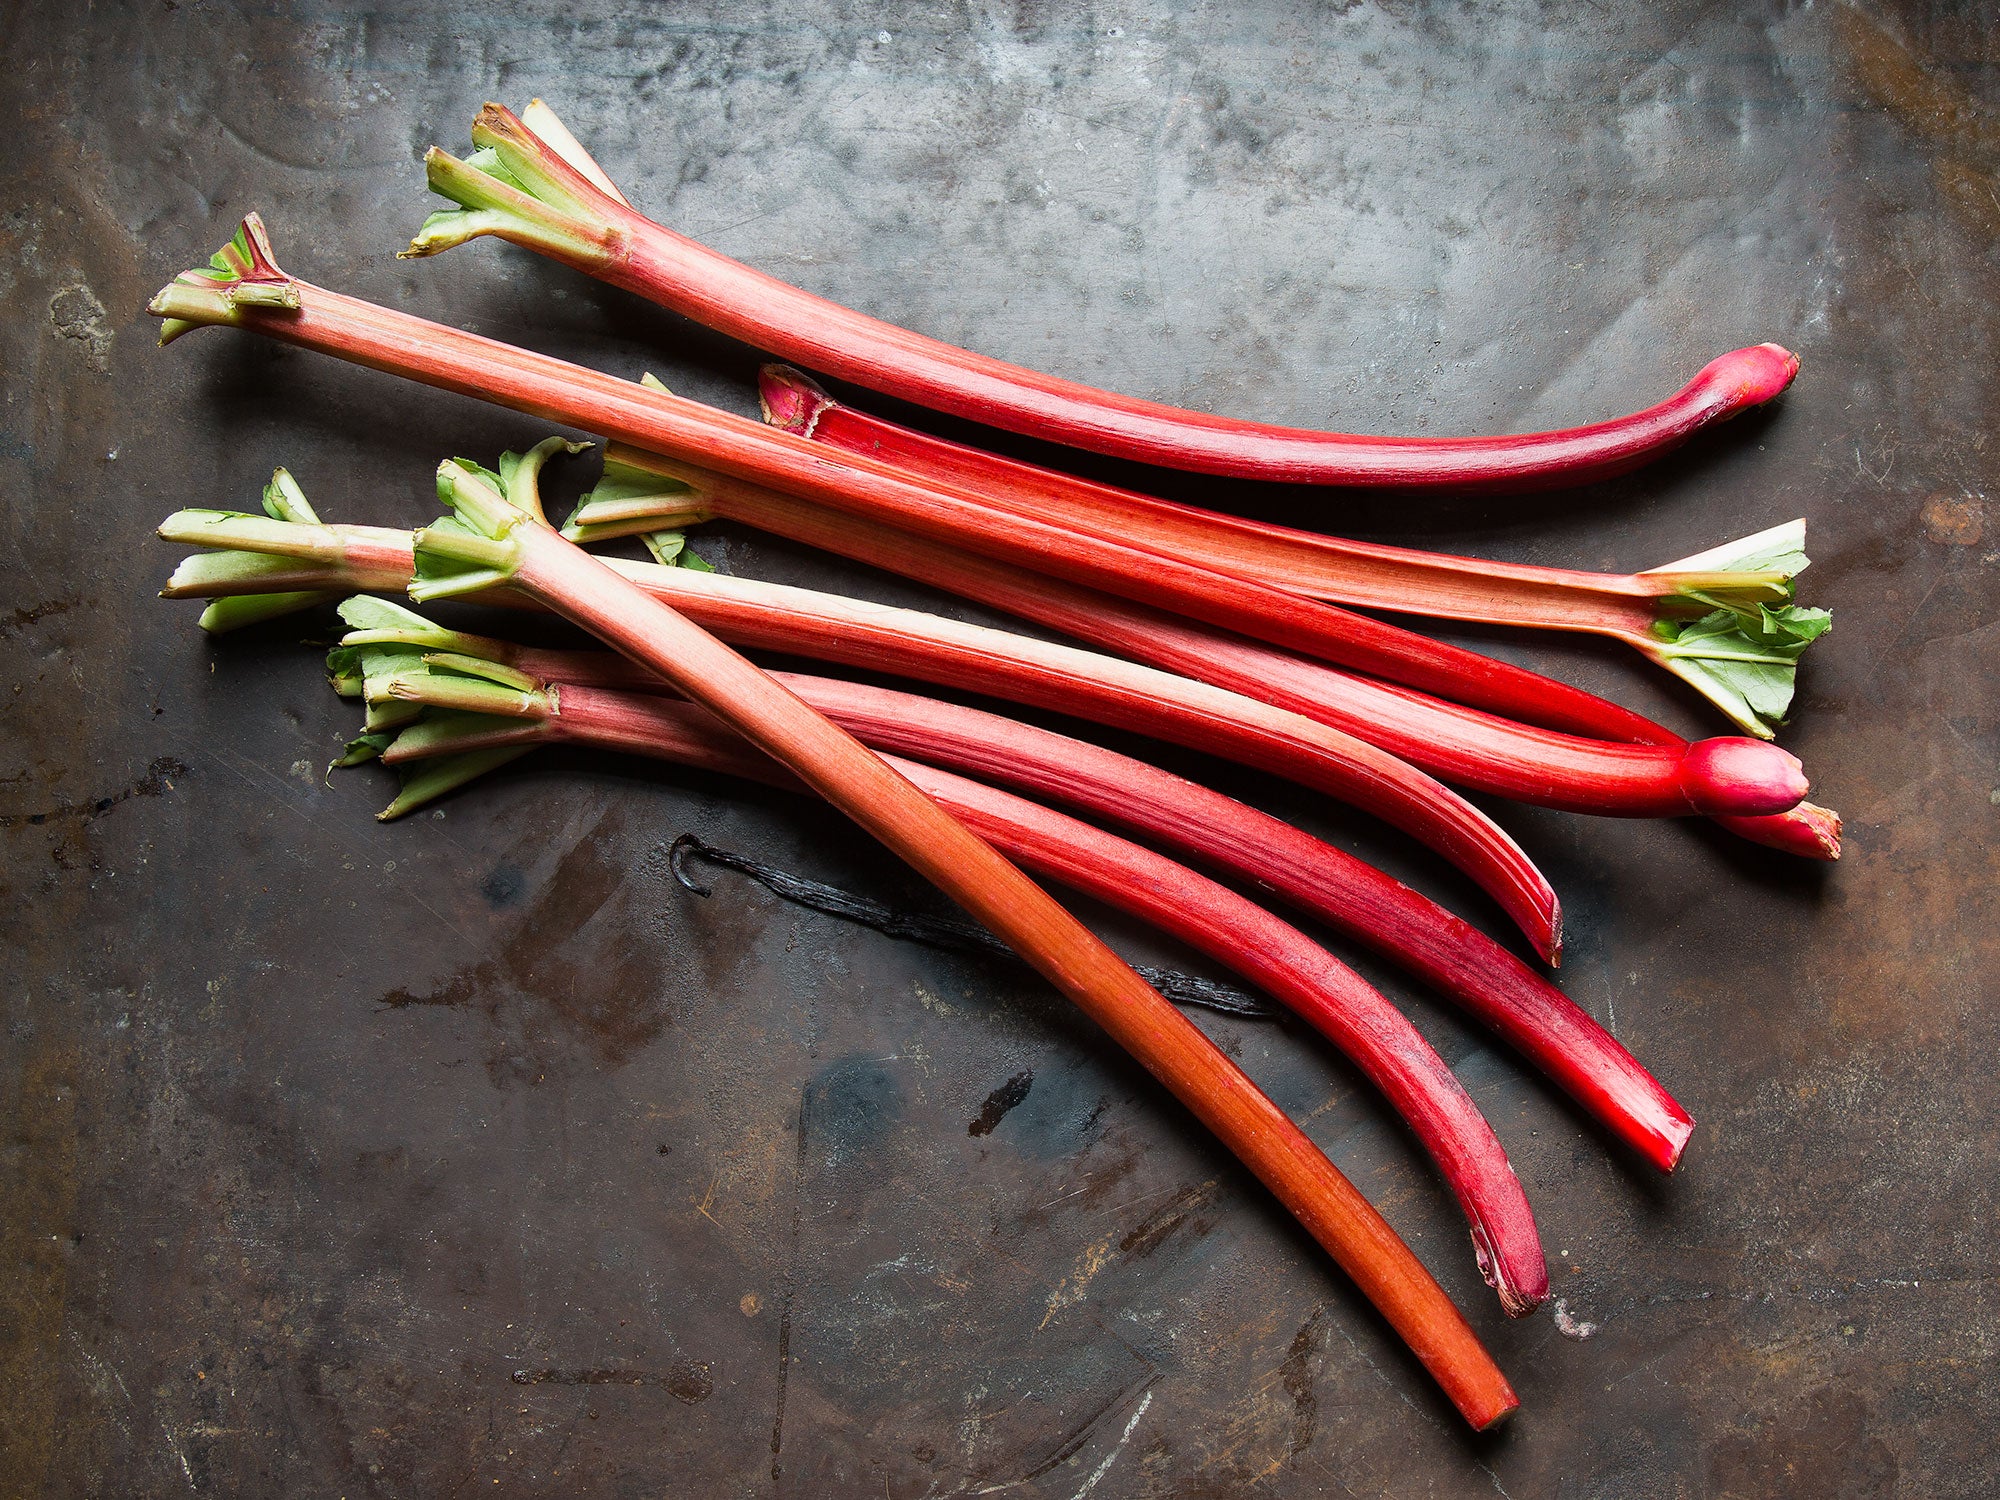 How to Cook With Rhubarb (Beyond Turning it Into Pie)